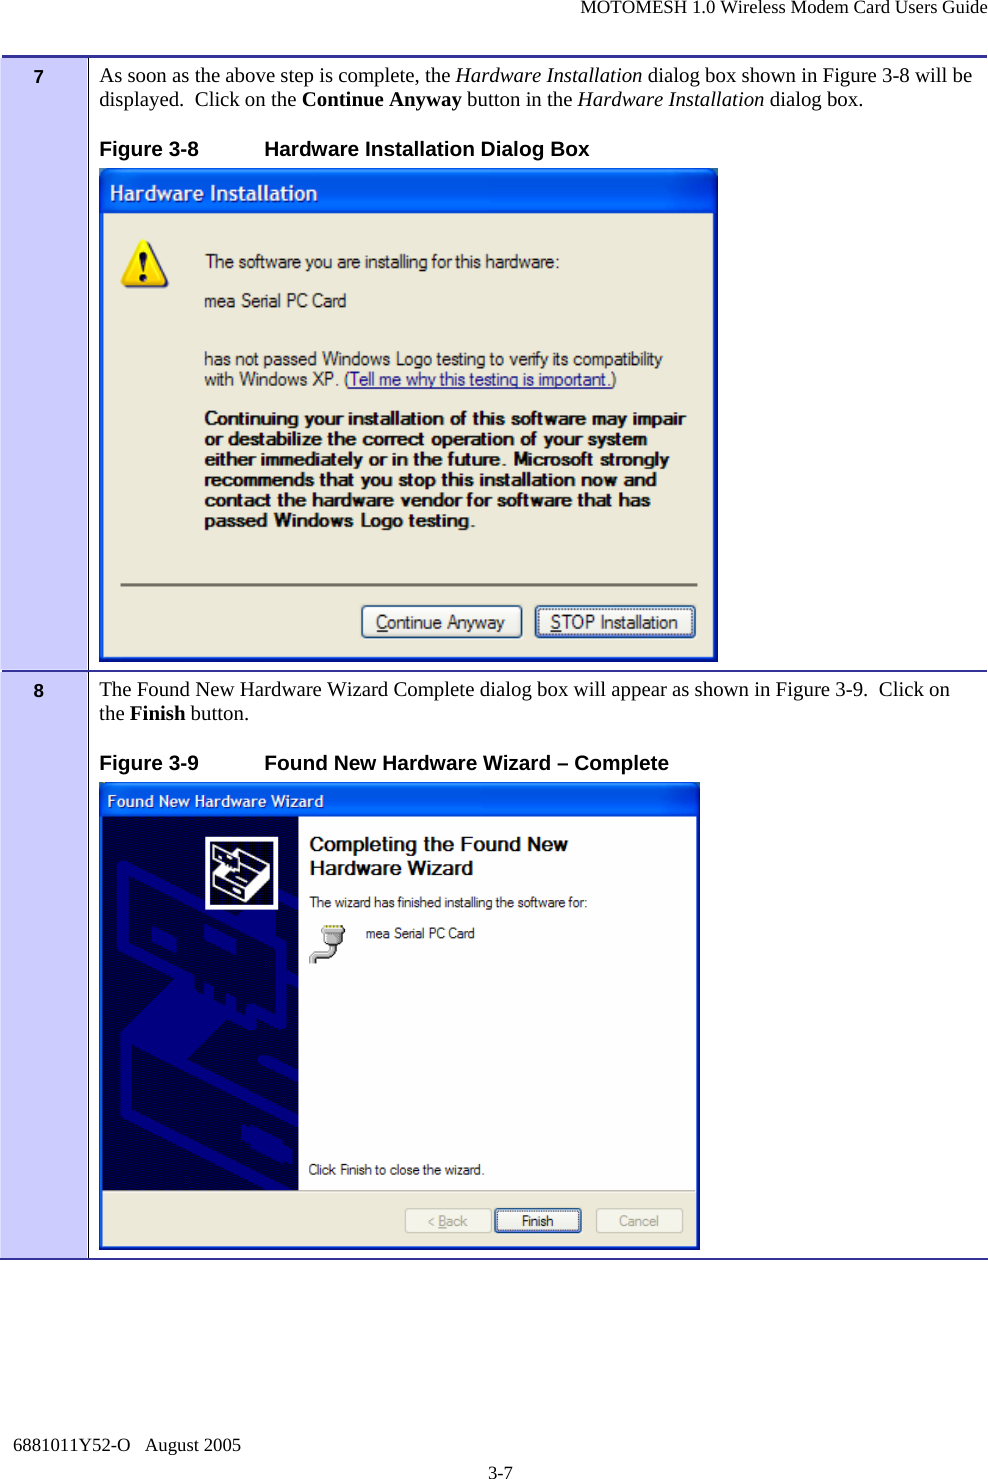 MOTOMESH 1.0 Wireless Modem Card Users Guide 6881011Y52-O   August 2005 3-7 7   As soon as the above step is complete, the Hardware Installation dialog box shown in Figure 3-8 will be displayed.  Click on the Continue Anyway button in the Hardware Installation dialog box. Figure 3-8  Hardware Installation Dialog Box  8   The Found New Hardware Wizard Complete dialog box will appear as shown in Figure 3-9.  Click on the Finish button. Figure 3-9  Found New Hardware Wizard – Complete  